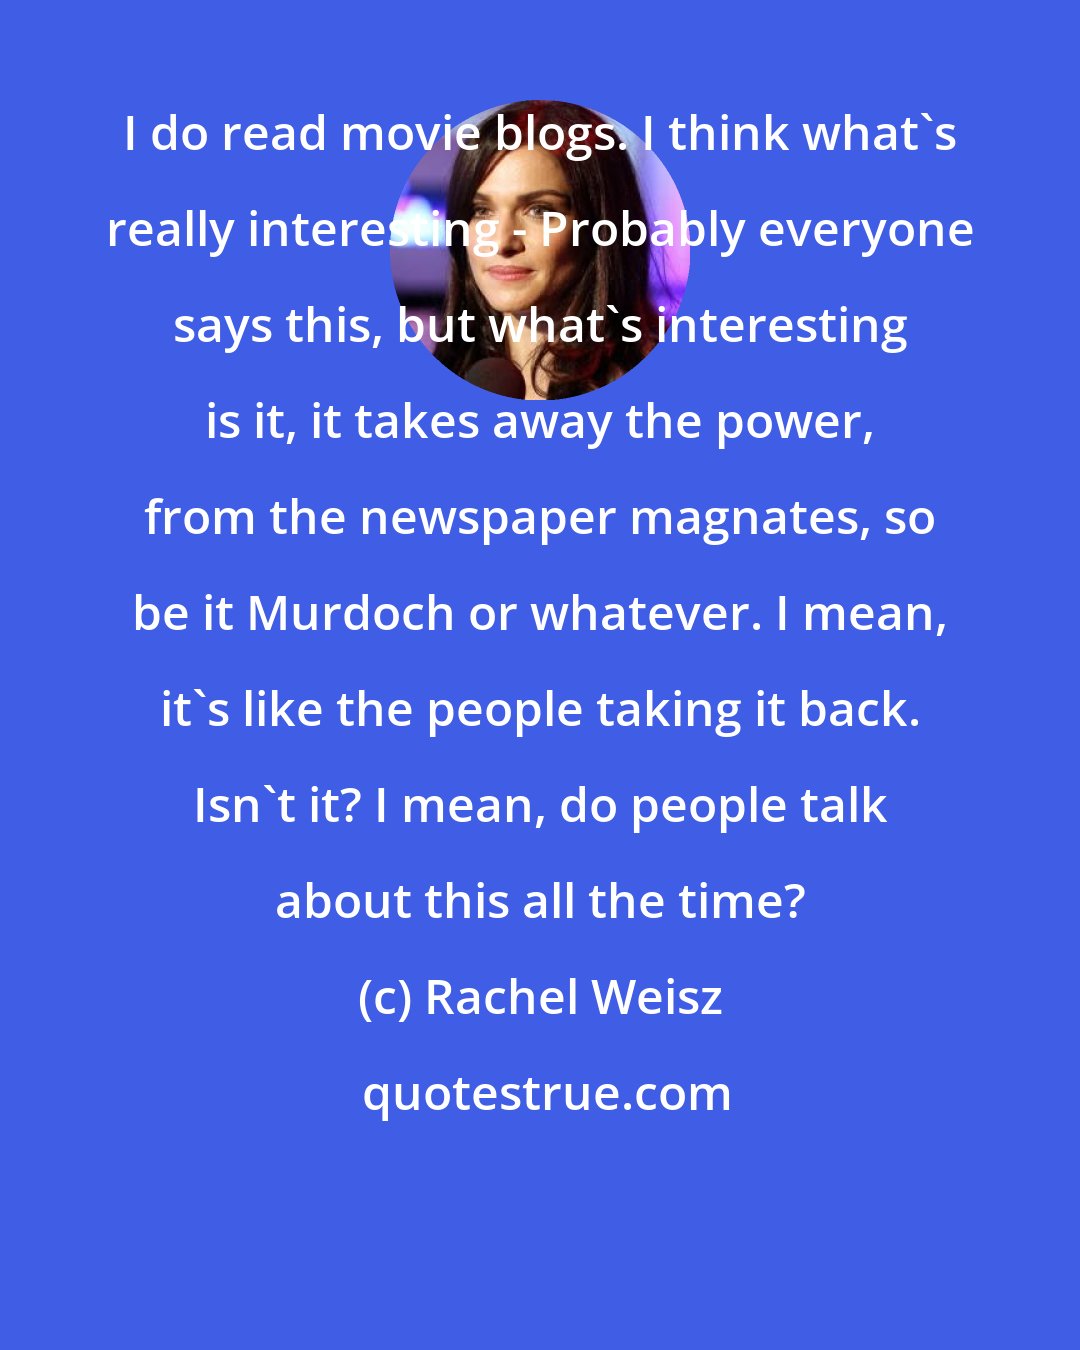 Rachel Weisz: I do read movie blogs. I think what's really interesting - Probably everyone says this, but what's interesting is it, it takes away the power, from the newspaper magnates, so be it Murdoch or whatever. I mean, it's like the people taking it back. Isn't it? I mean, do people talk about this all the time?